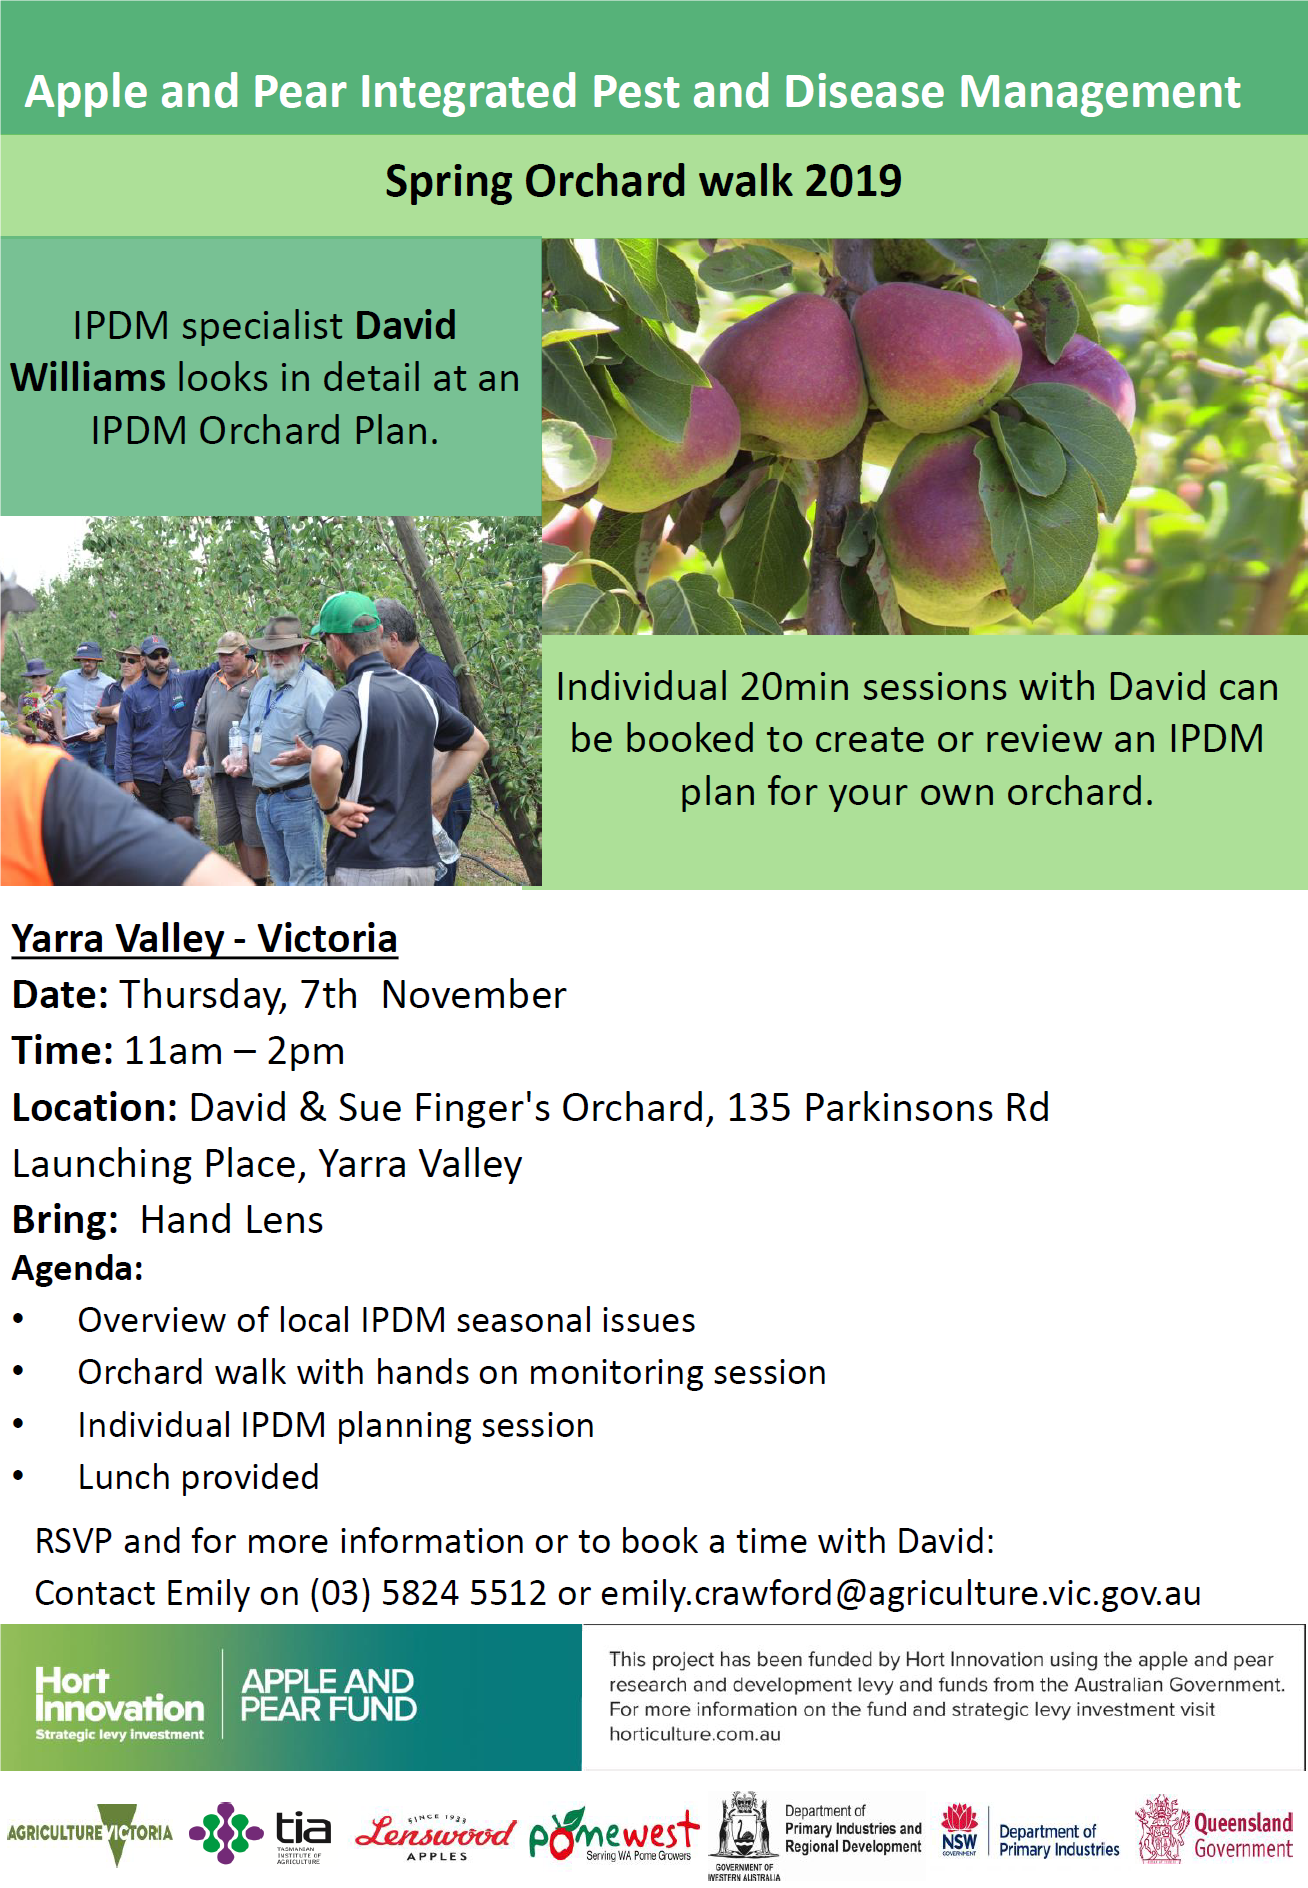 Apple and Pear Integrated Pest and Disease Management Workshop- 7th November, Yarra Valley